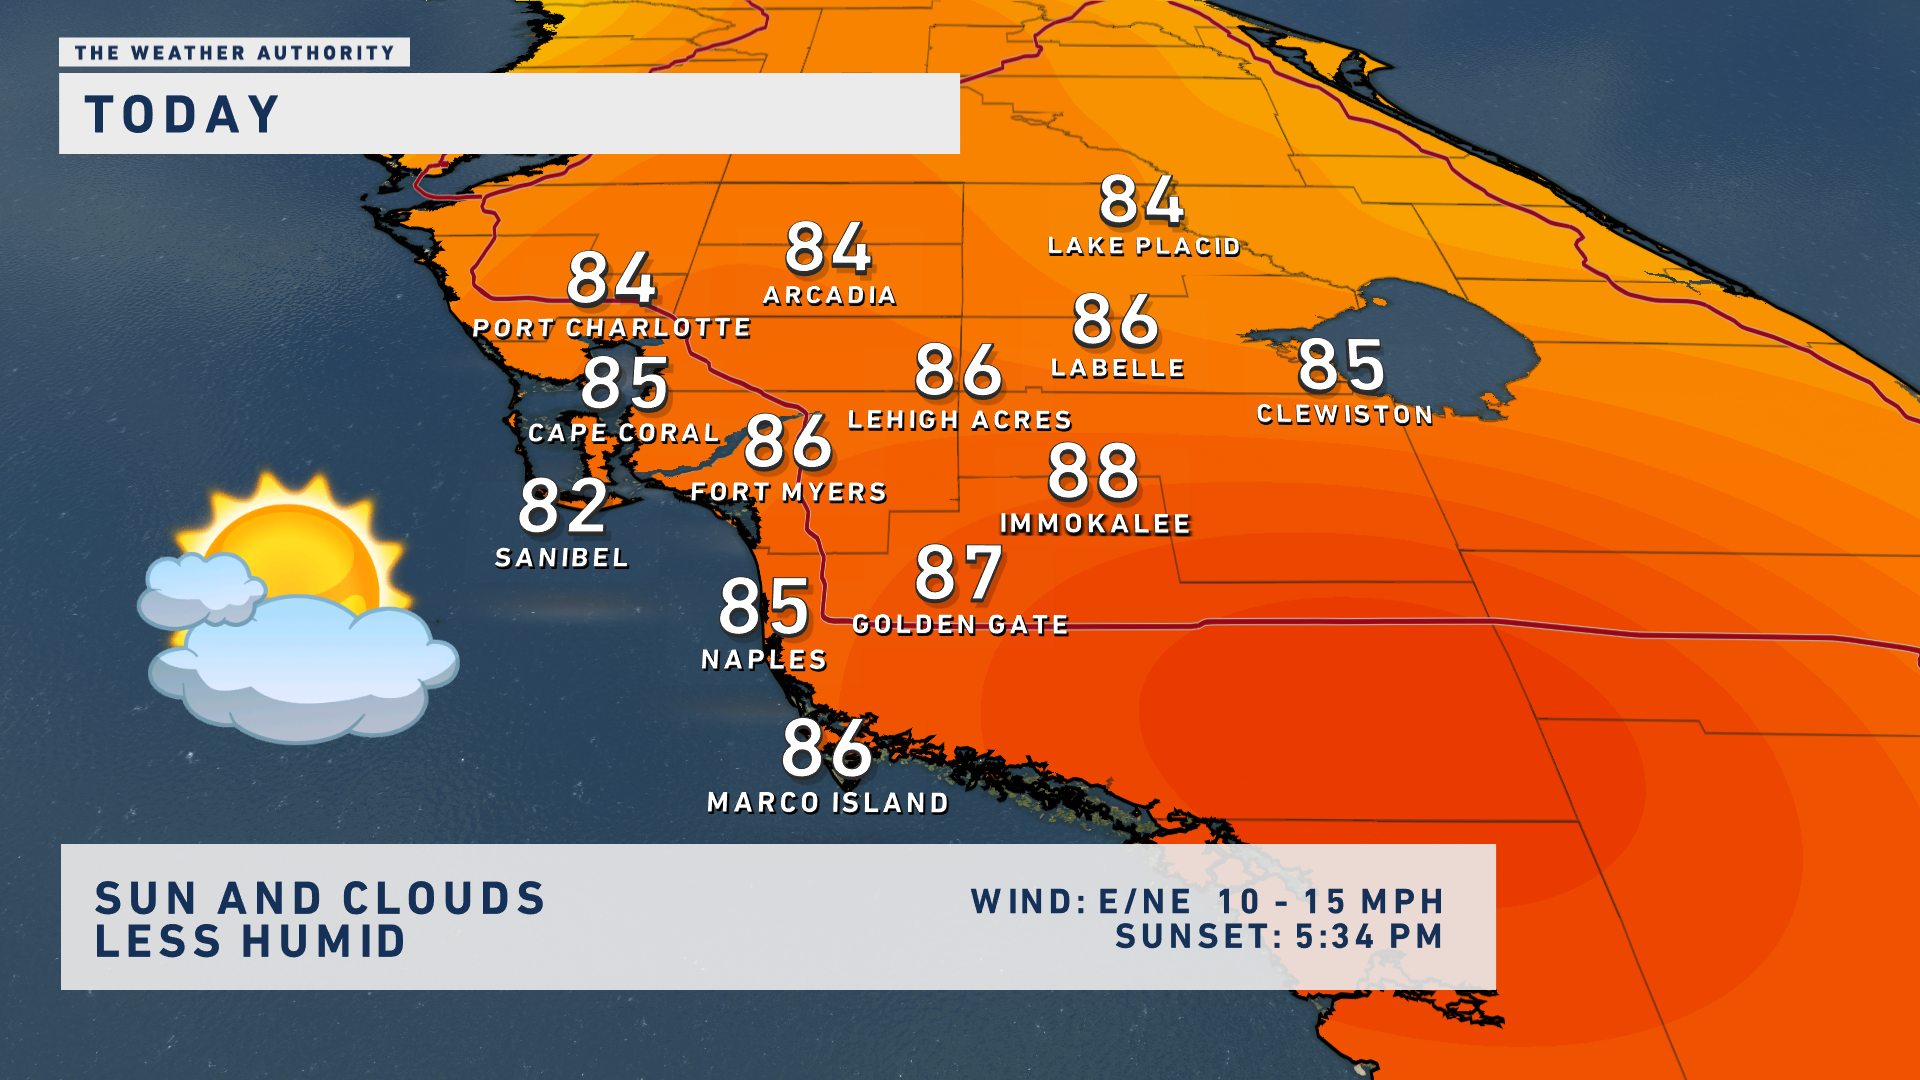 Hot, dry Tuesday in southwest Florida